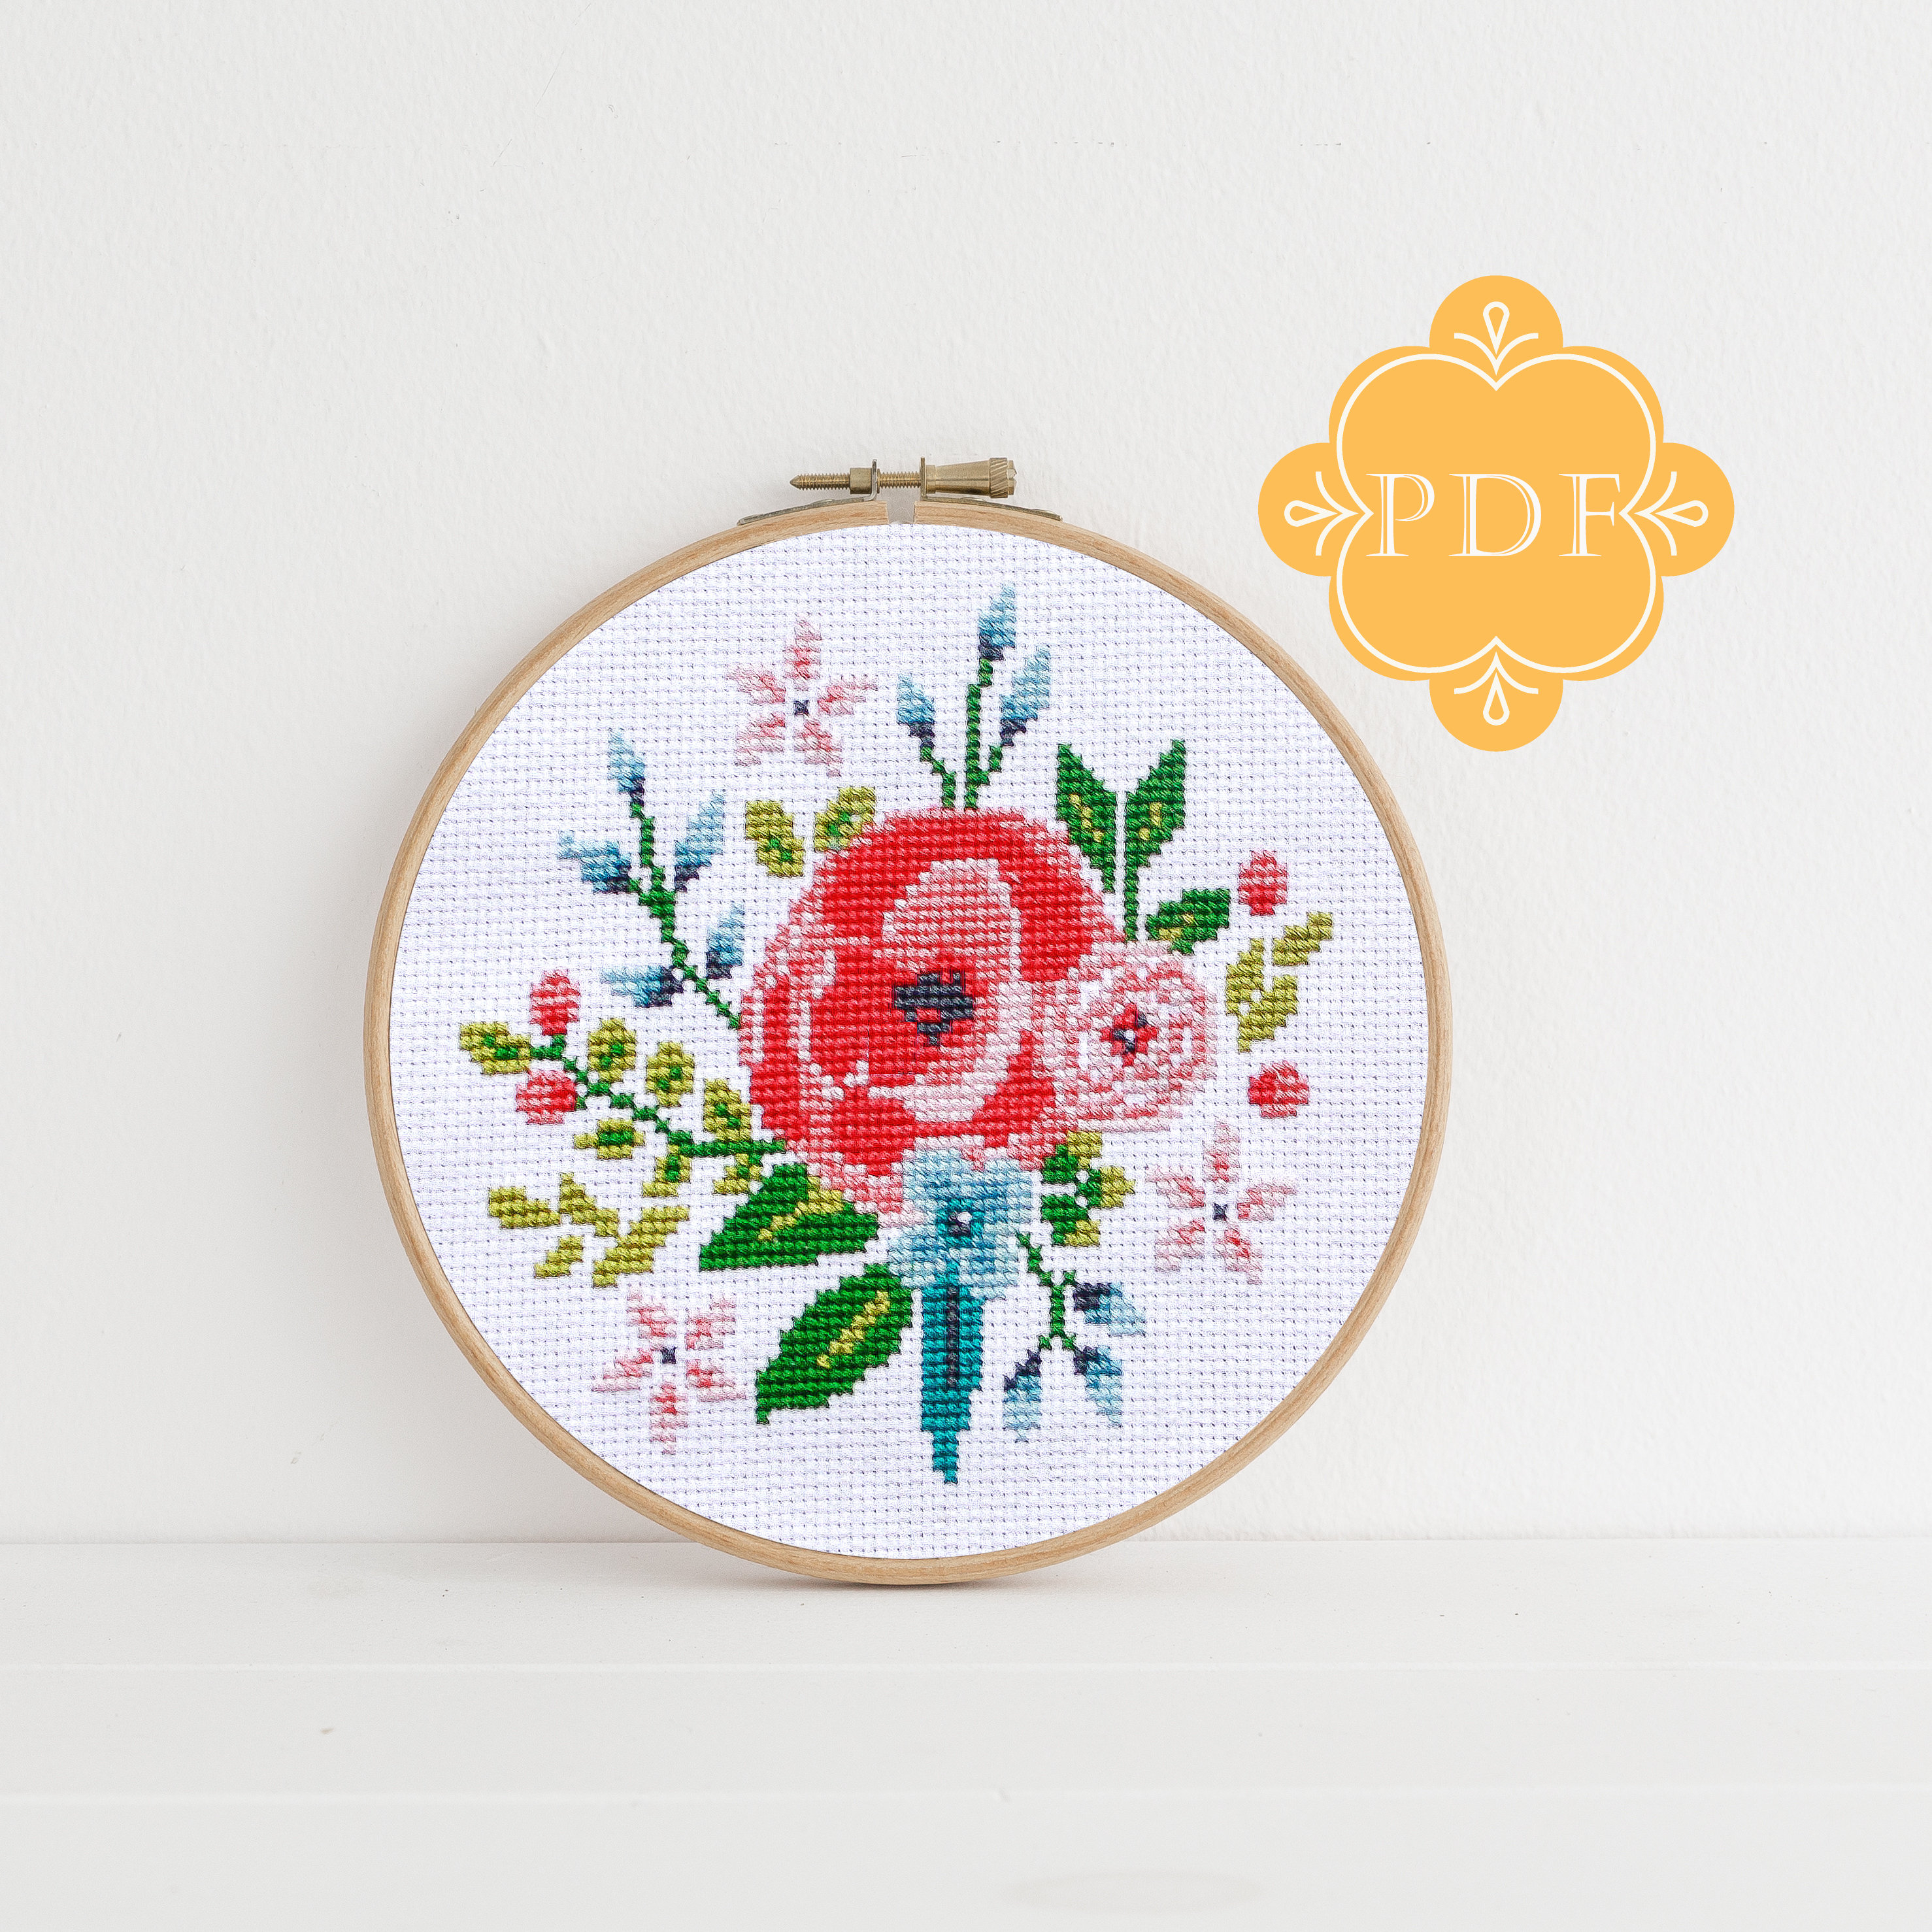 Embroidery Cross Stitch Patterns Pdf Counted Cross Stitch Vintage Floral Cross Stitch Pattern